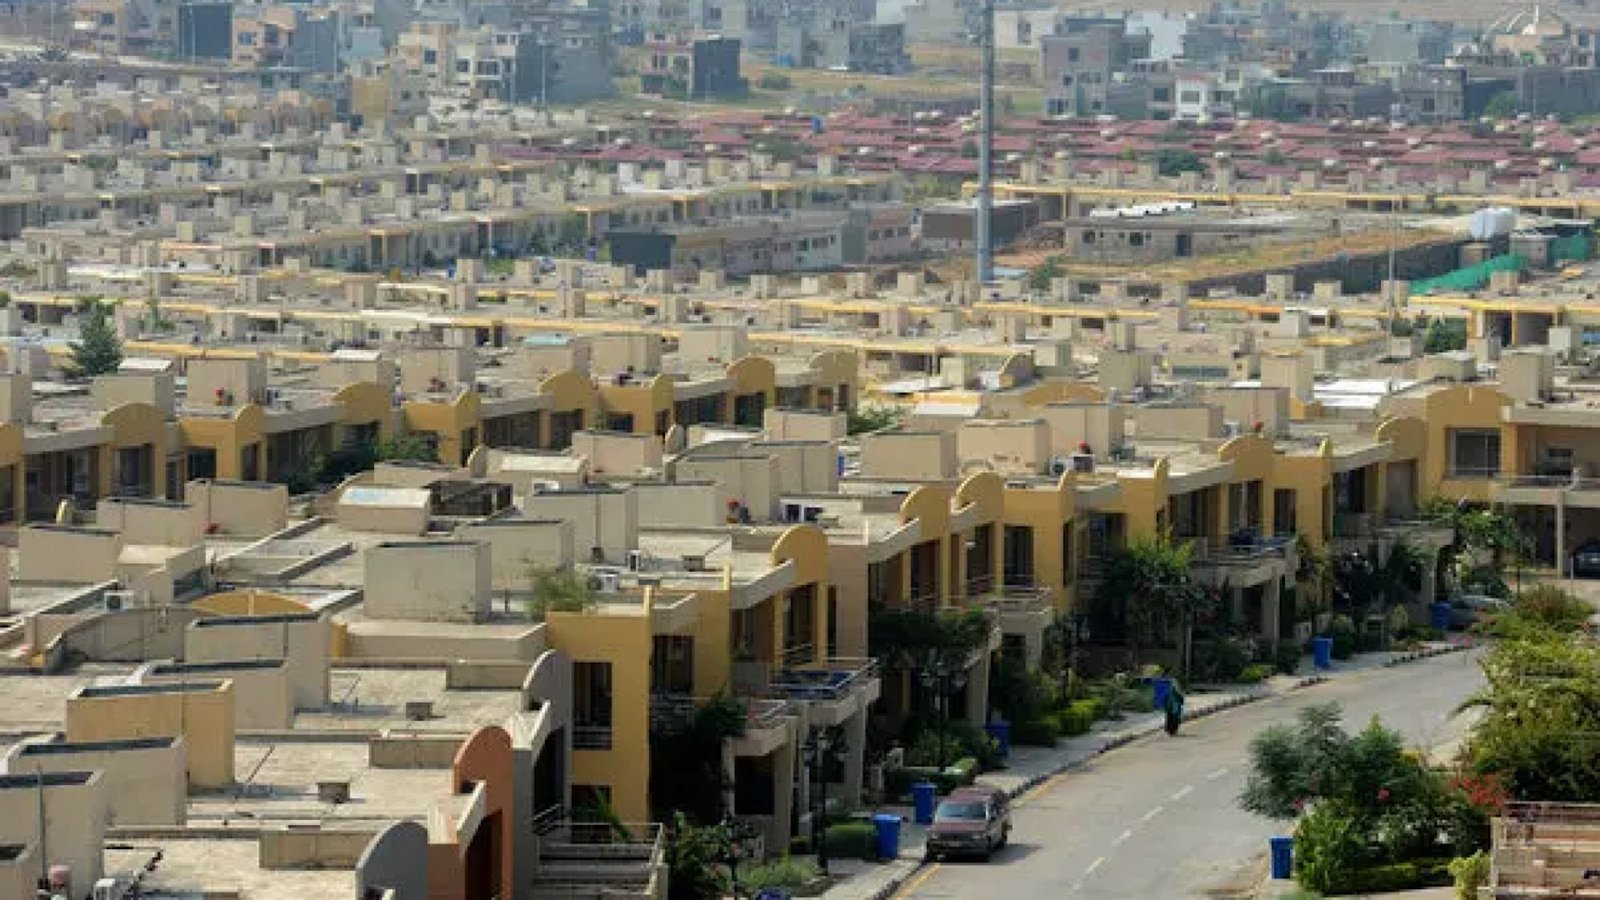 More Than 1,100 Housing Schemes in Punjab Are Illegal: Report